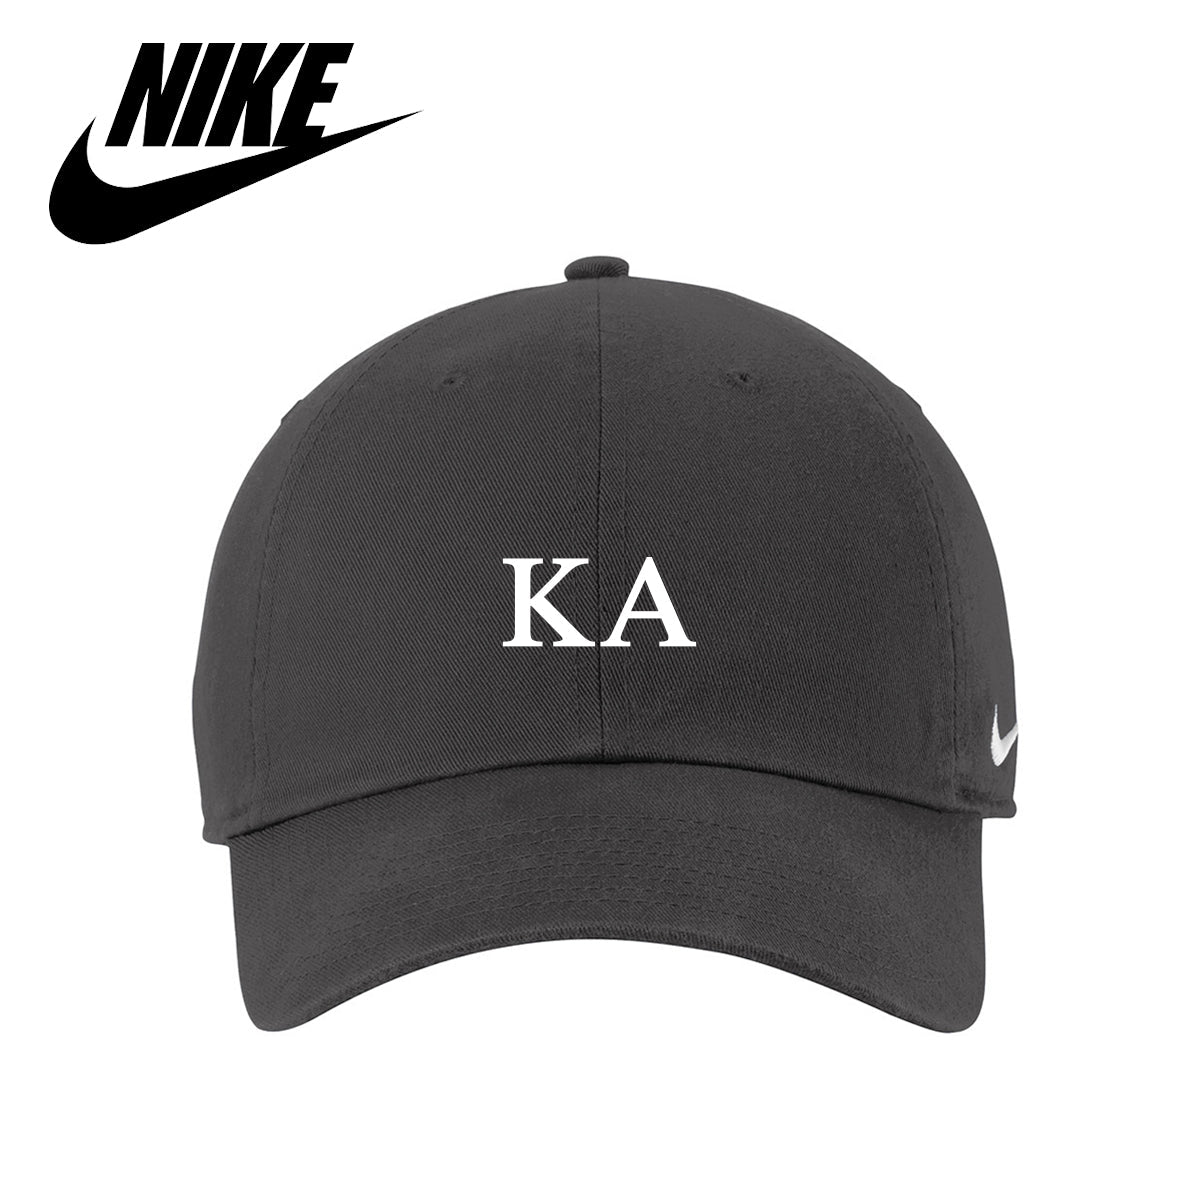 New! Kappa Alpha Nike Heritage Hat With Greek Letters